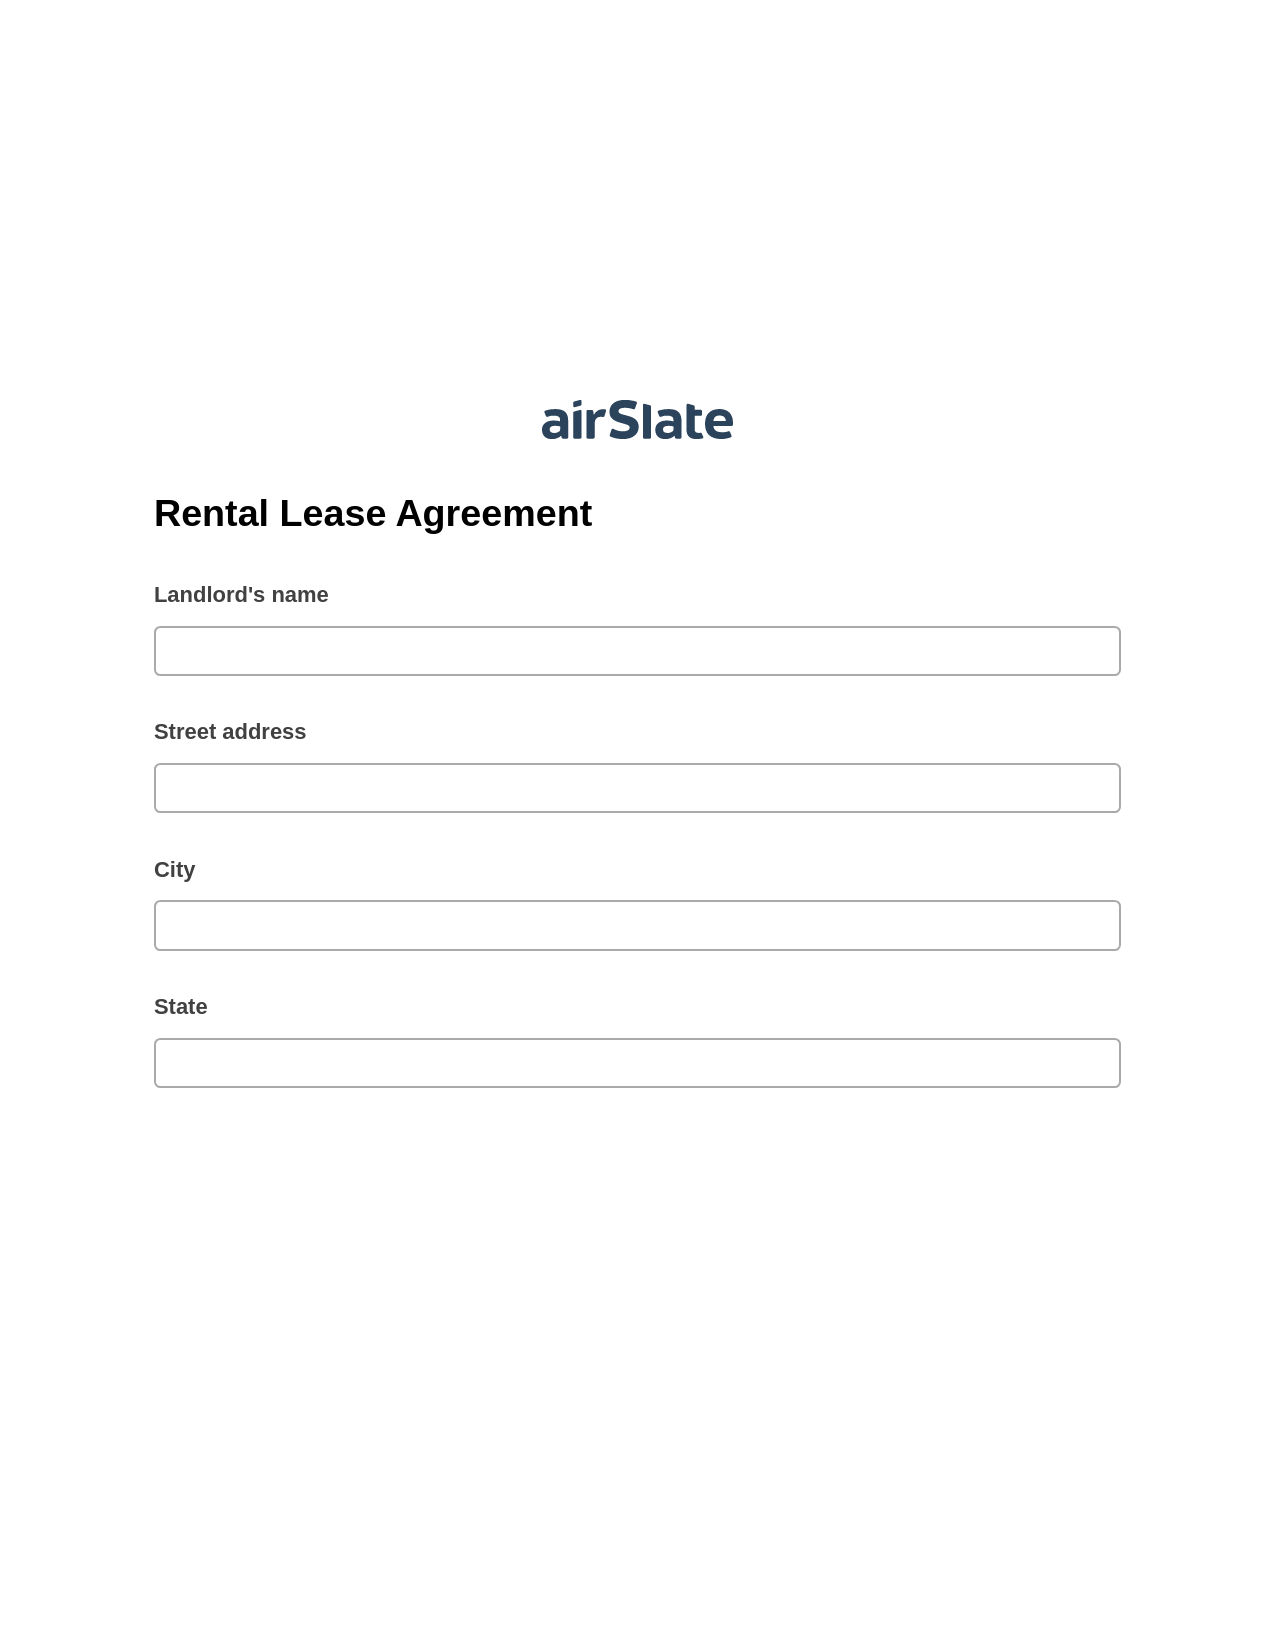 Multirole Rental Lease Agreement Pre-fill from another Slate Bot, System Bot - Create a Slate in another Flow, OneDrive Bot